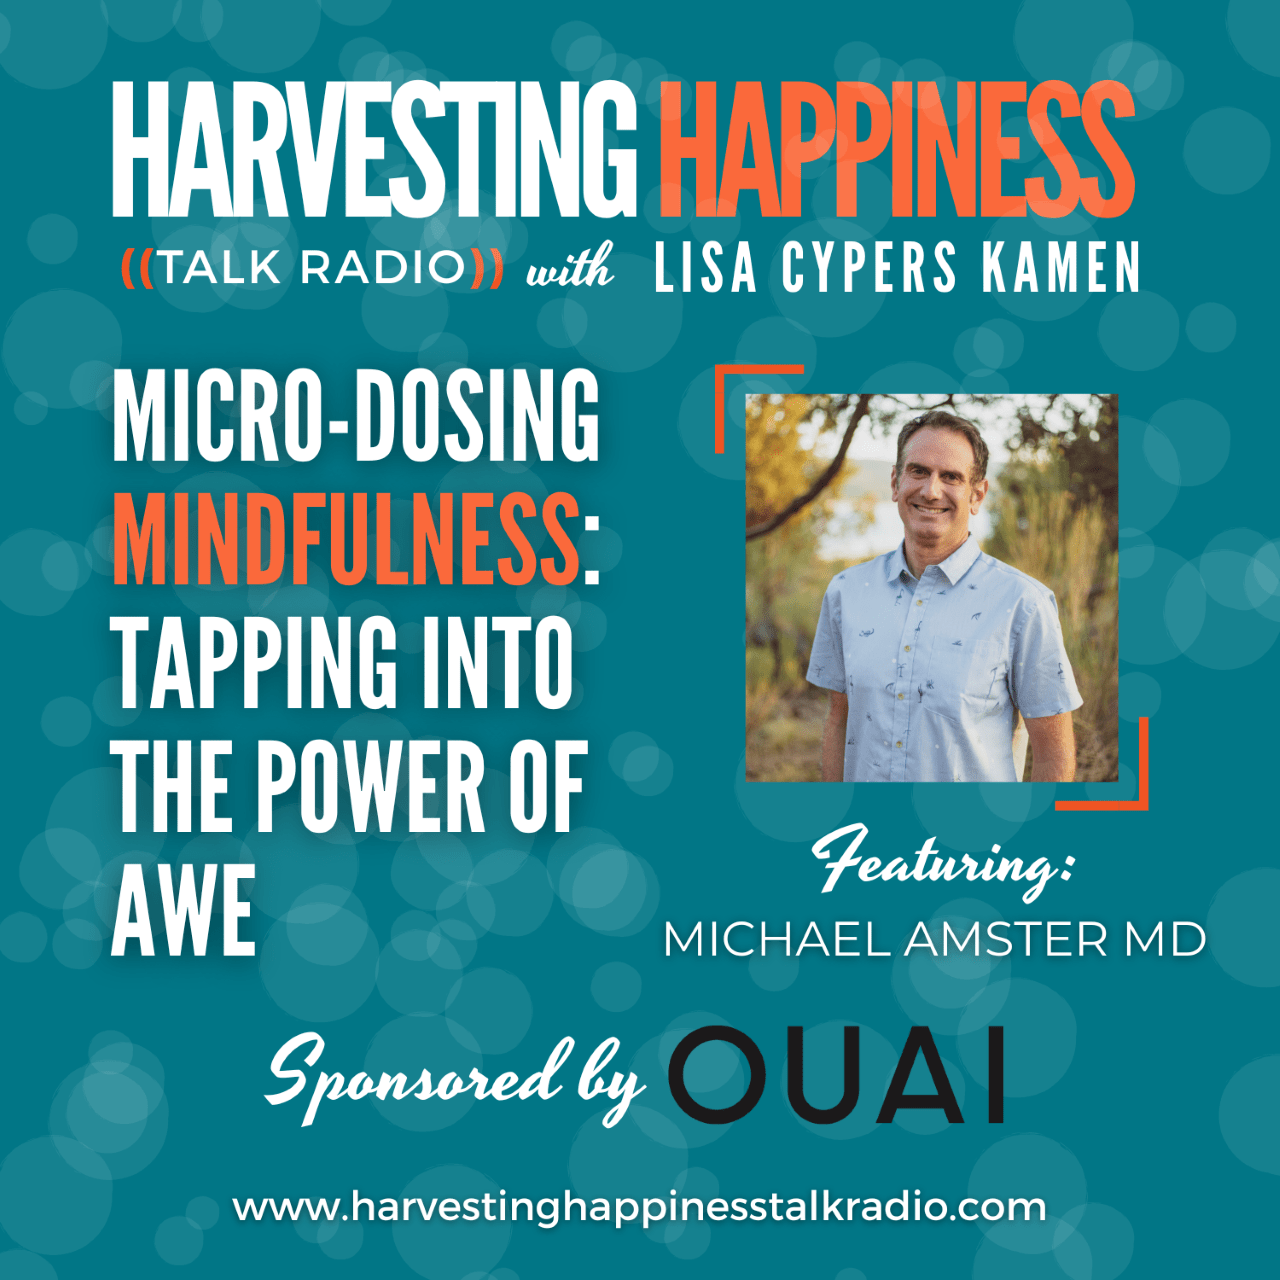 Podcast episode about mindfulness with Michael Amster and positive psychology expert Lisa Cypers Kamen, sponsored by OUAI